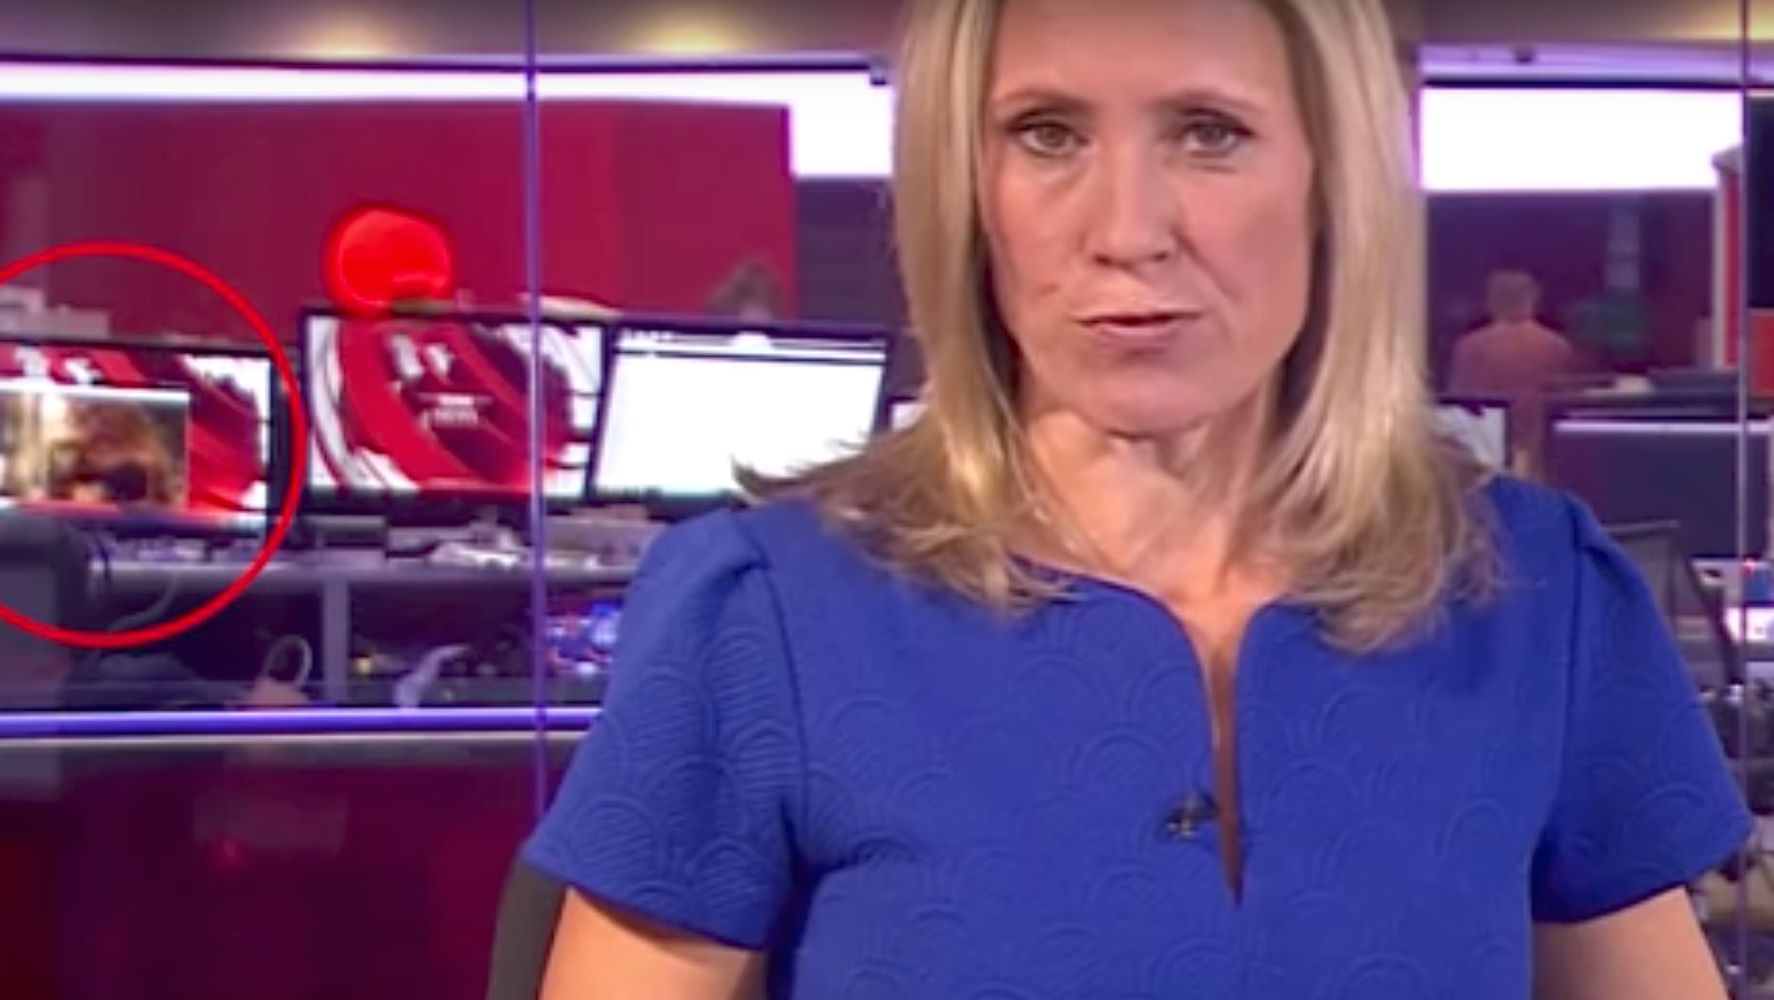 French Nude Beach Bbc - BBC Airs NSFW Nude Scene During Live News Broadcast | HuffPost Weird News